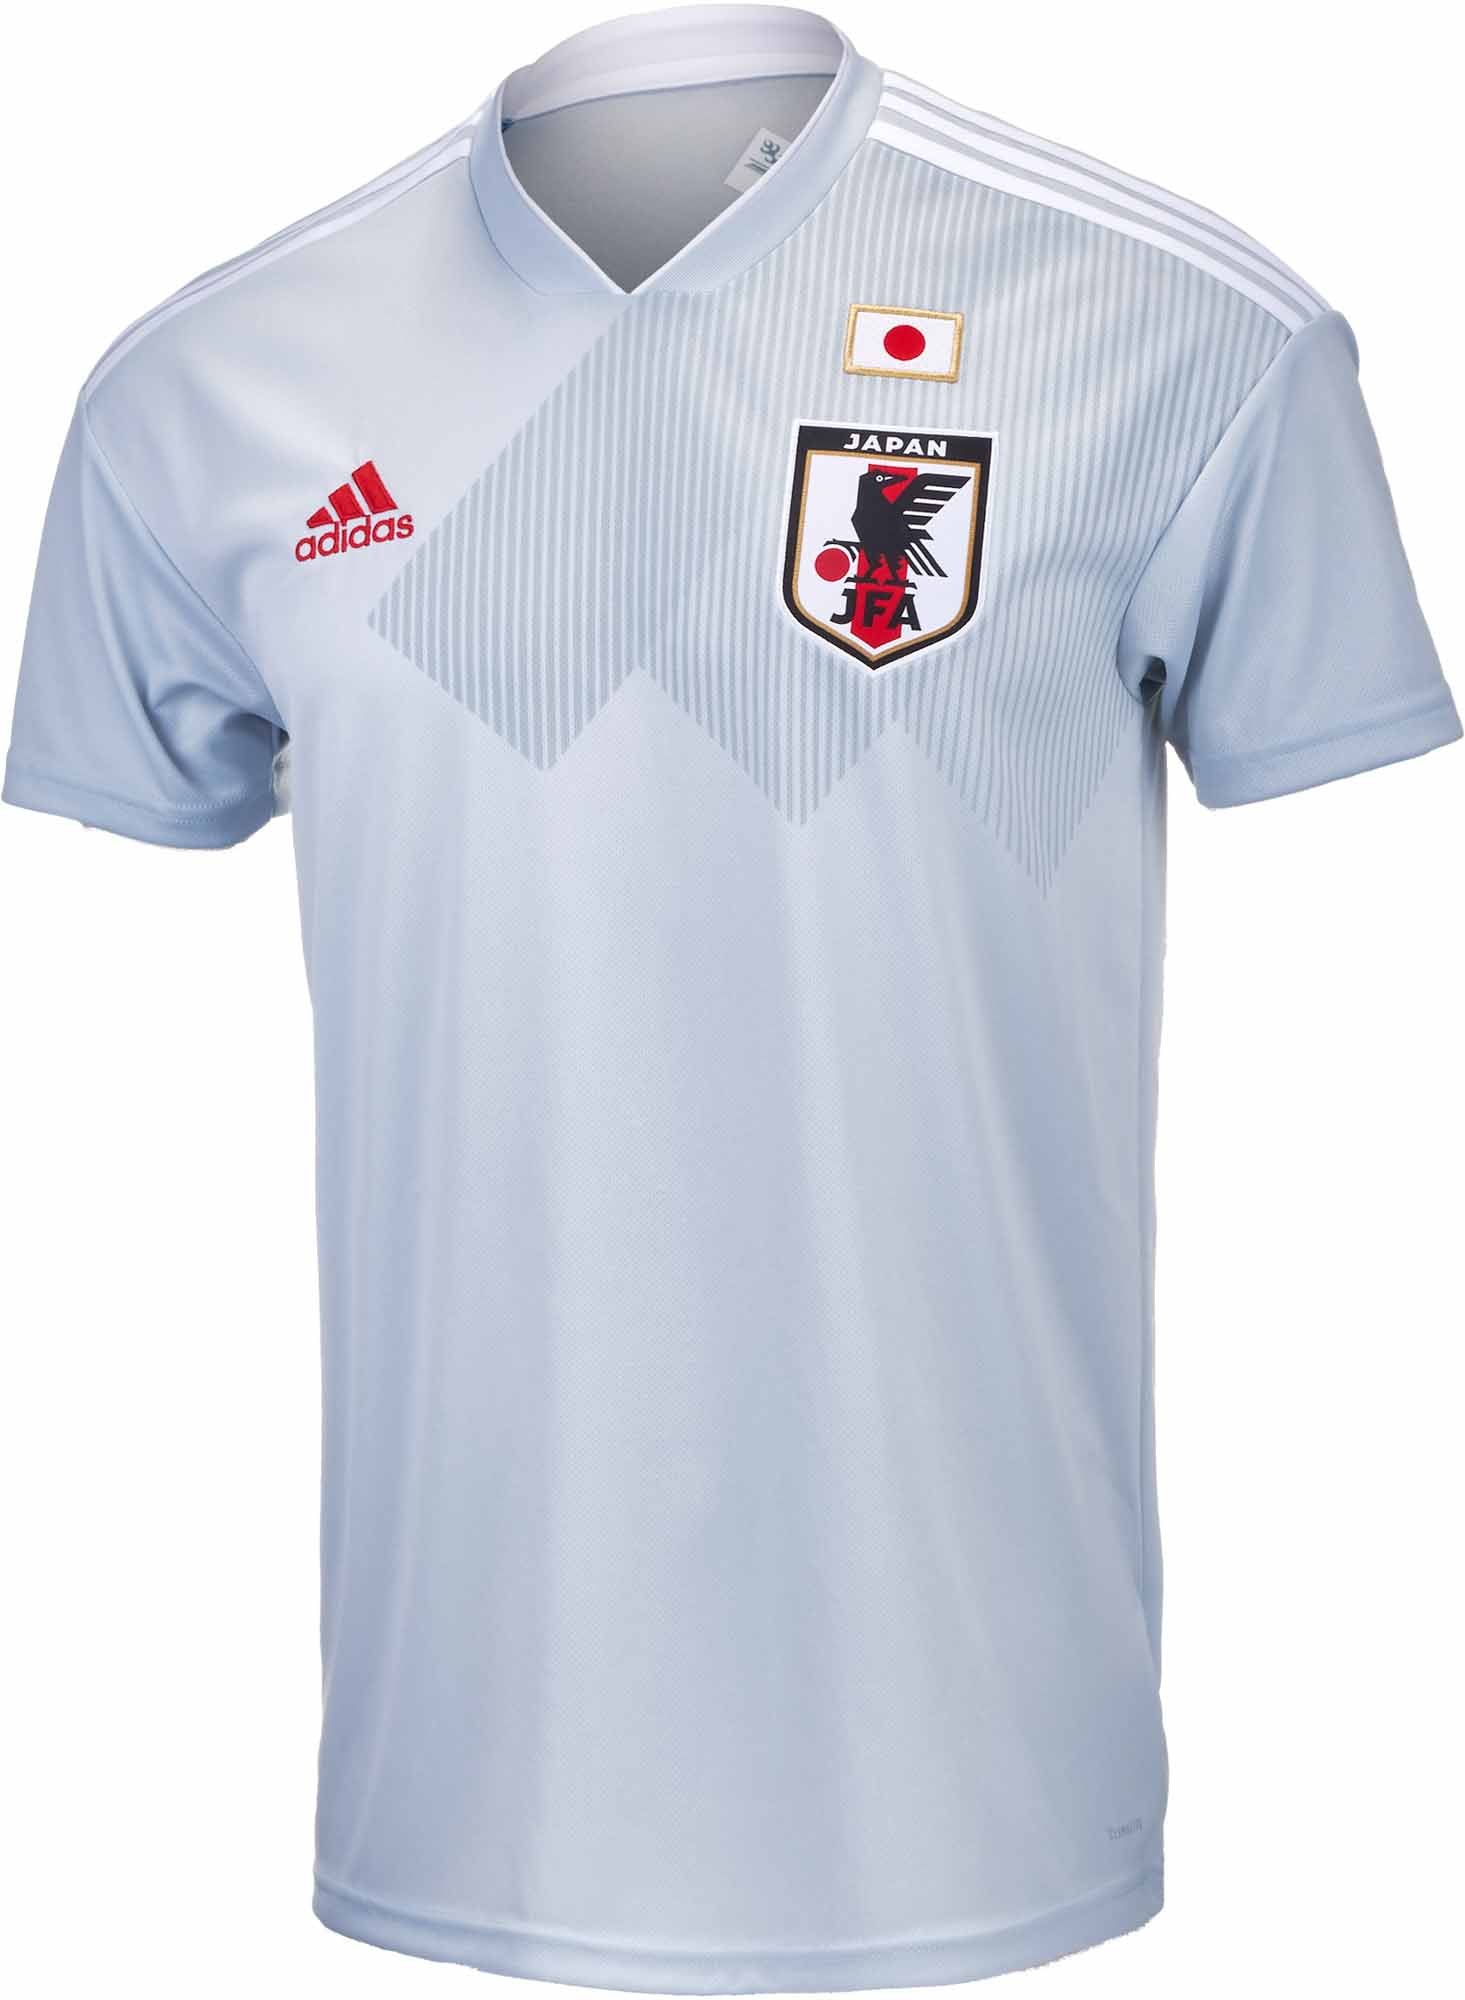 columbia adidas climalite 2018 national team home replica jersey size